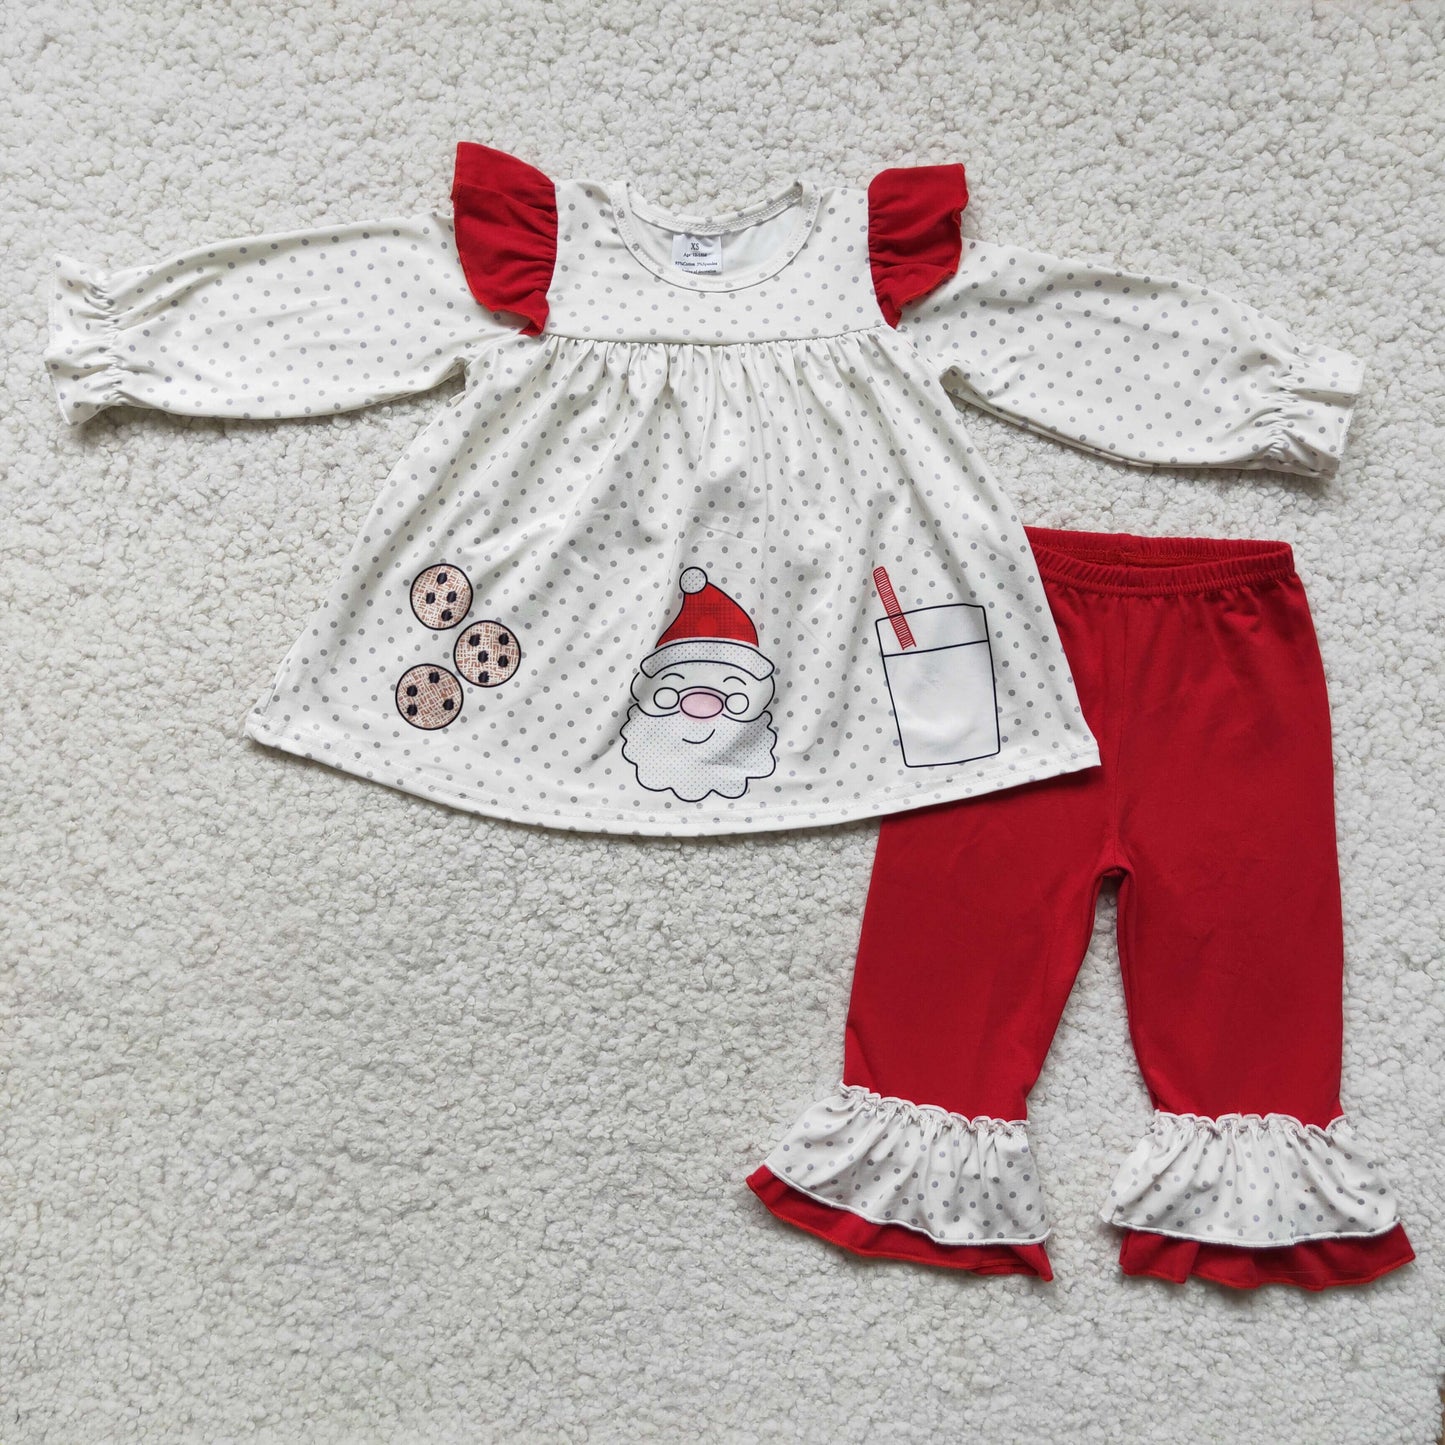 Baby girls Christmas outfit